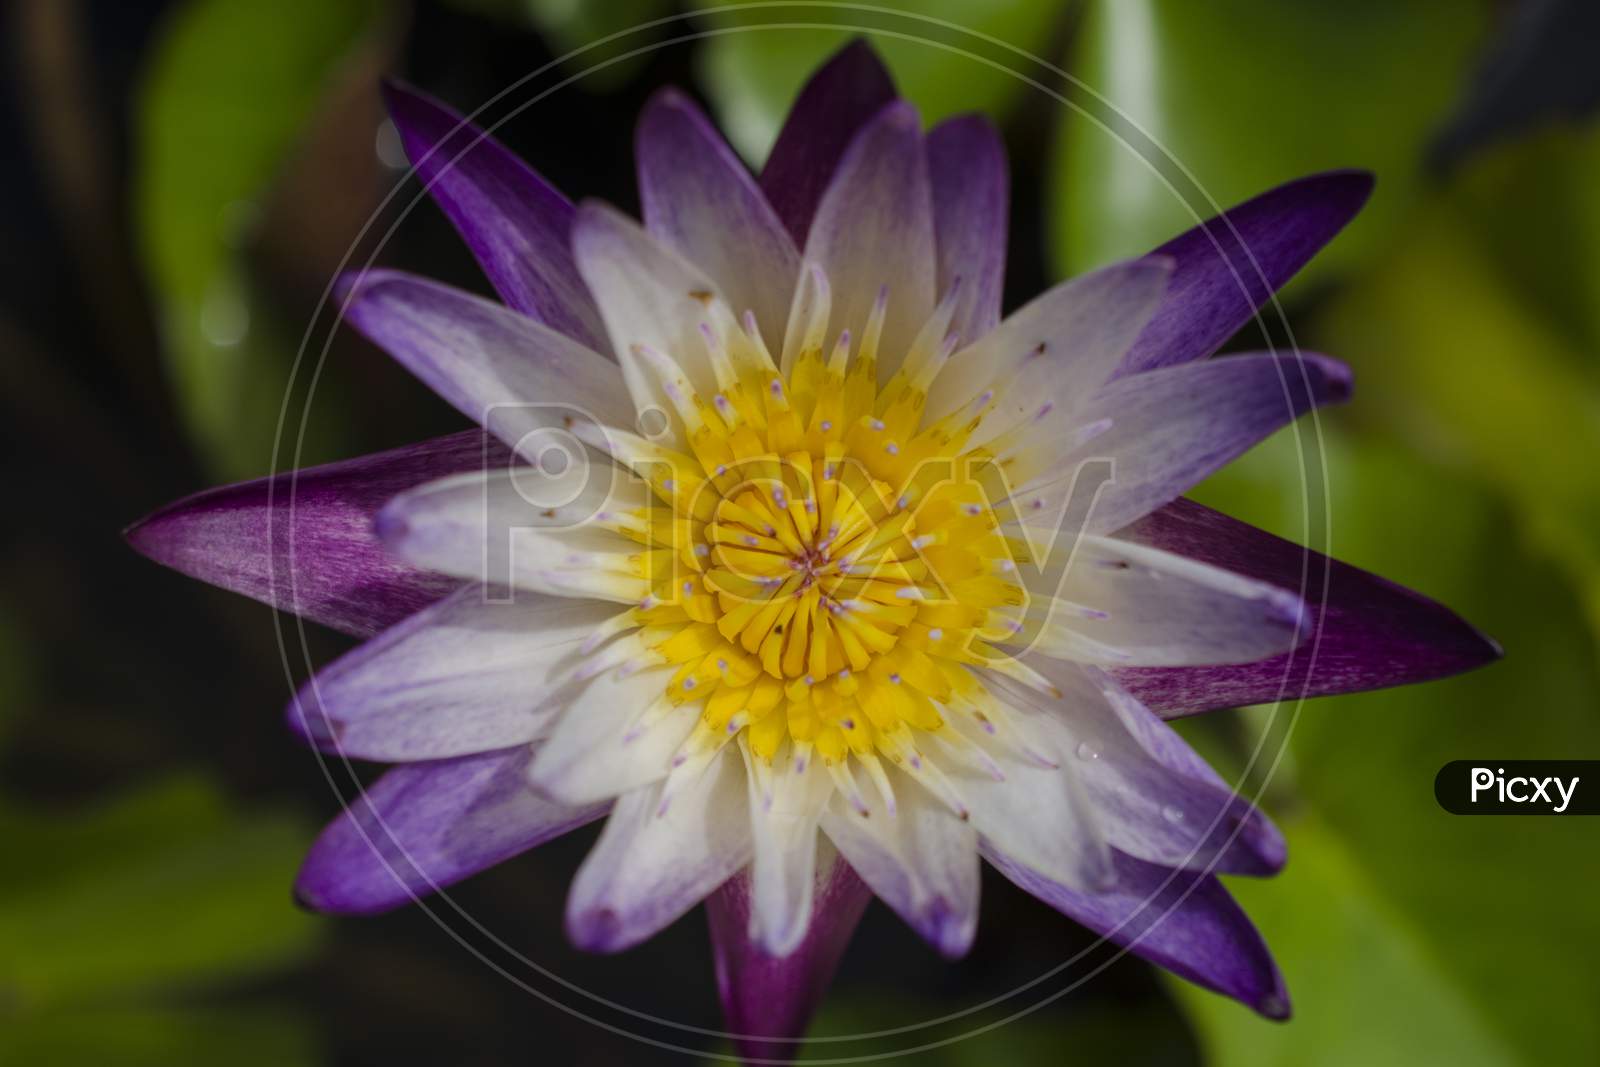 Purple Water Lily With Yellow Stamen Above The Water. White And Purple At The Petals.